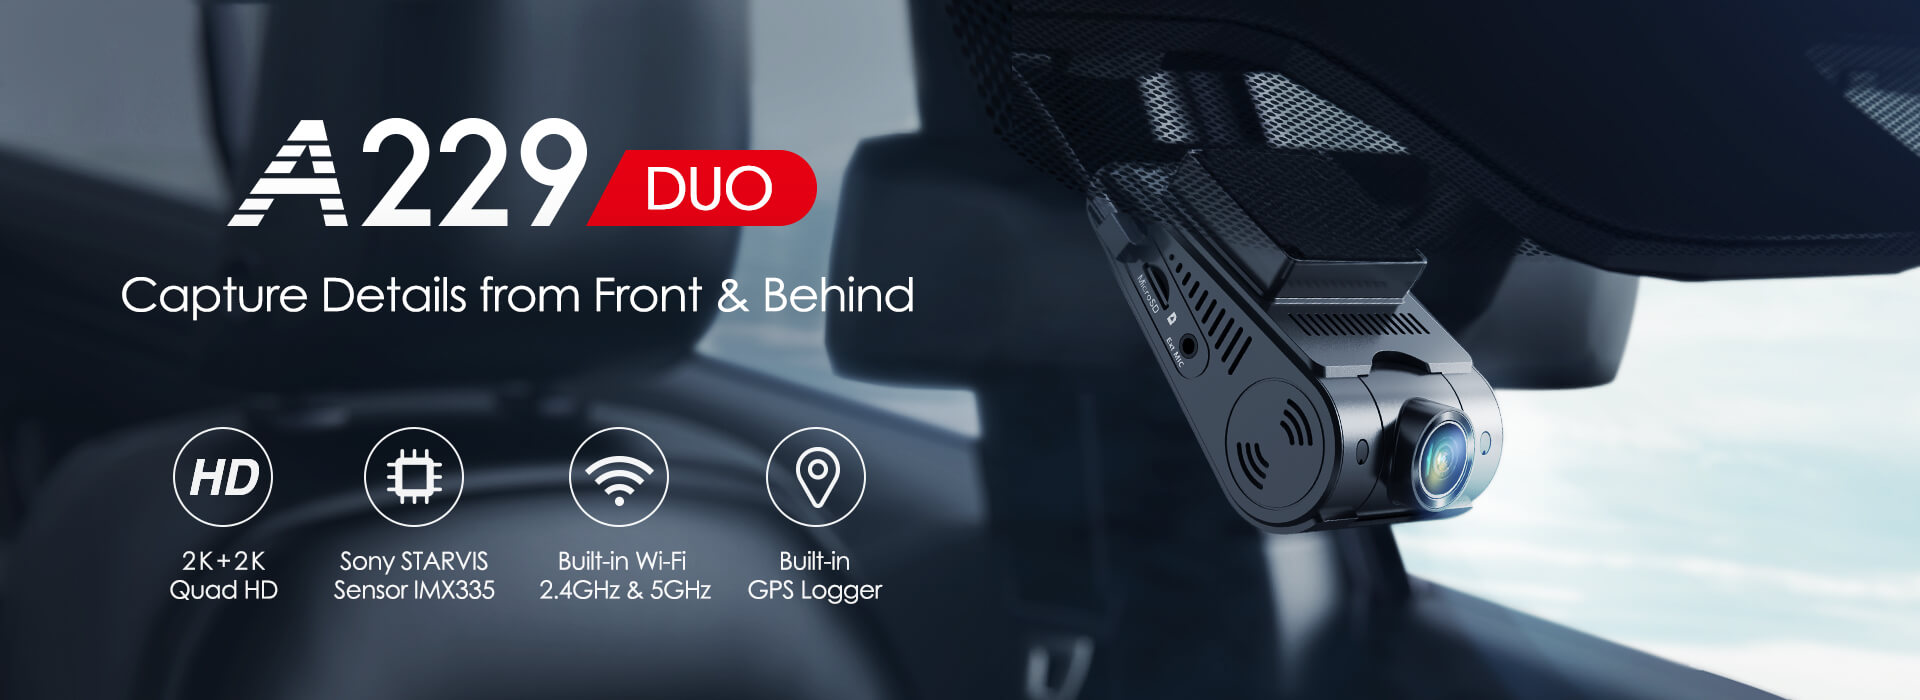 Viofo A229 Duo G | Capture 2K QHD Video From Front & Rear